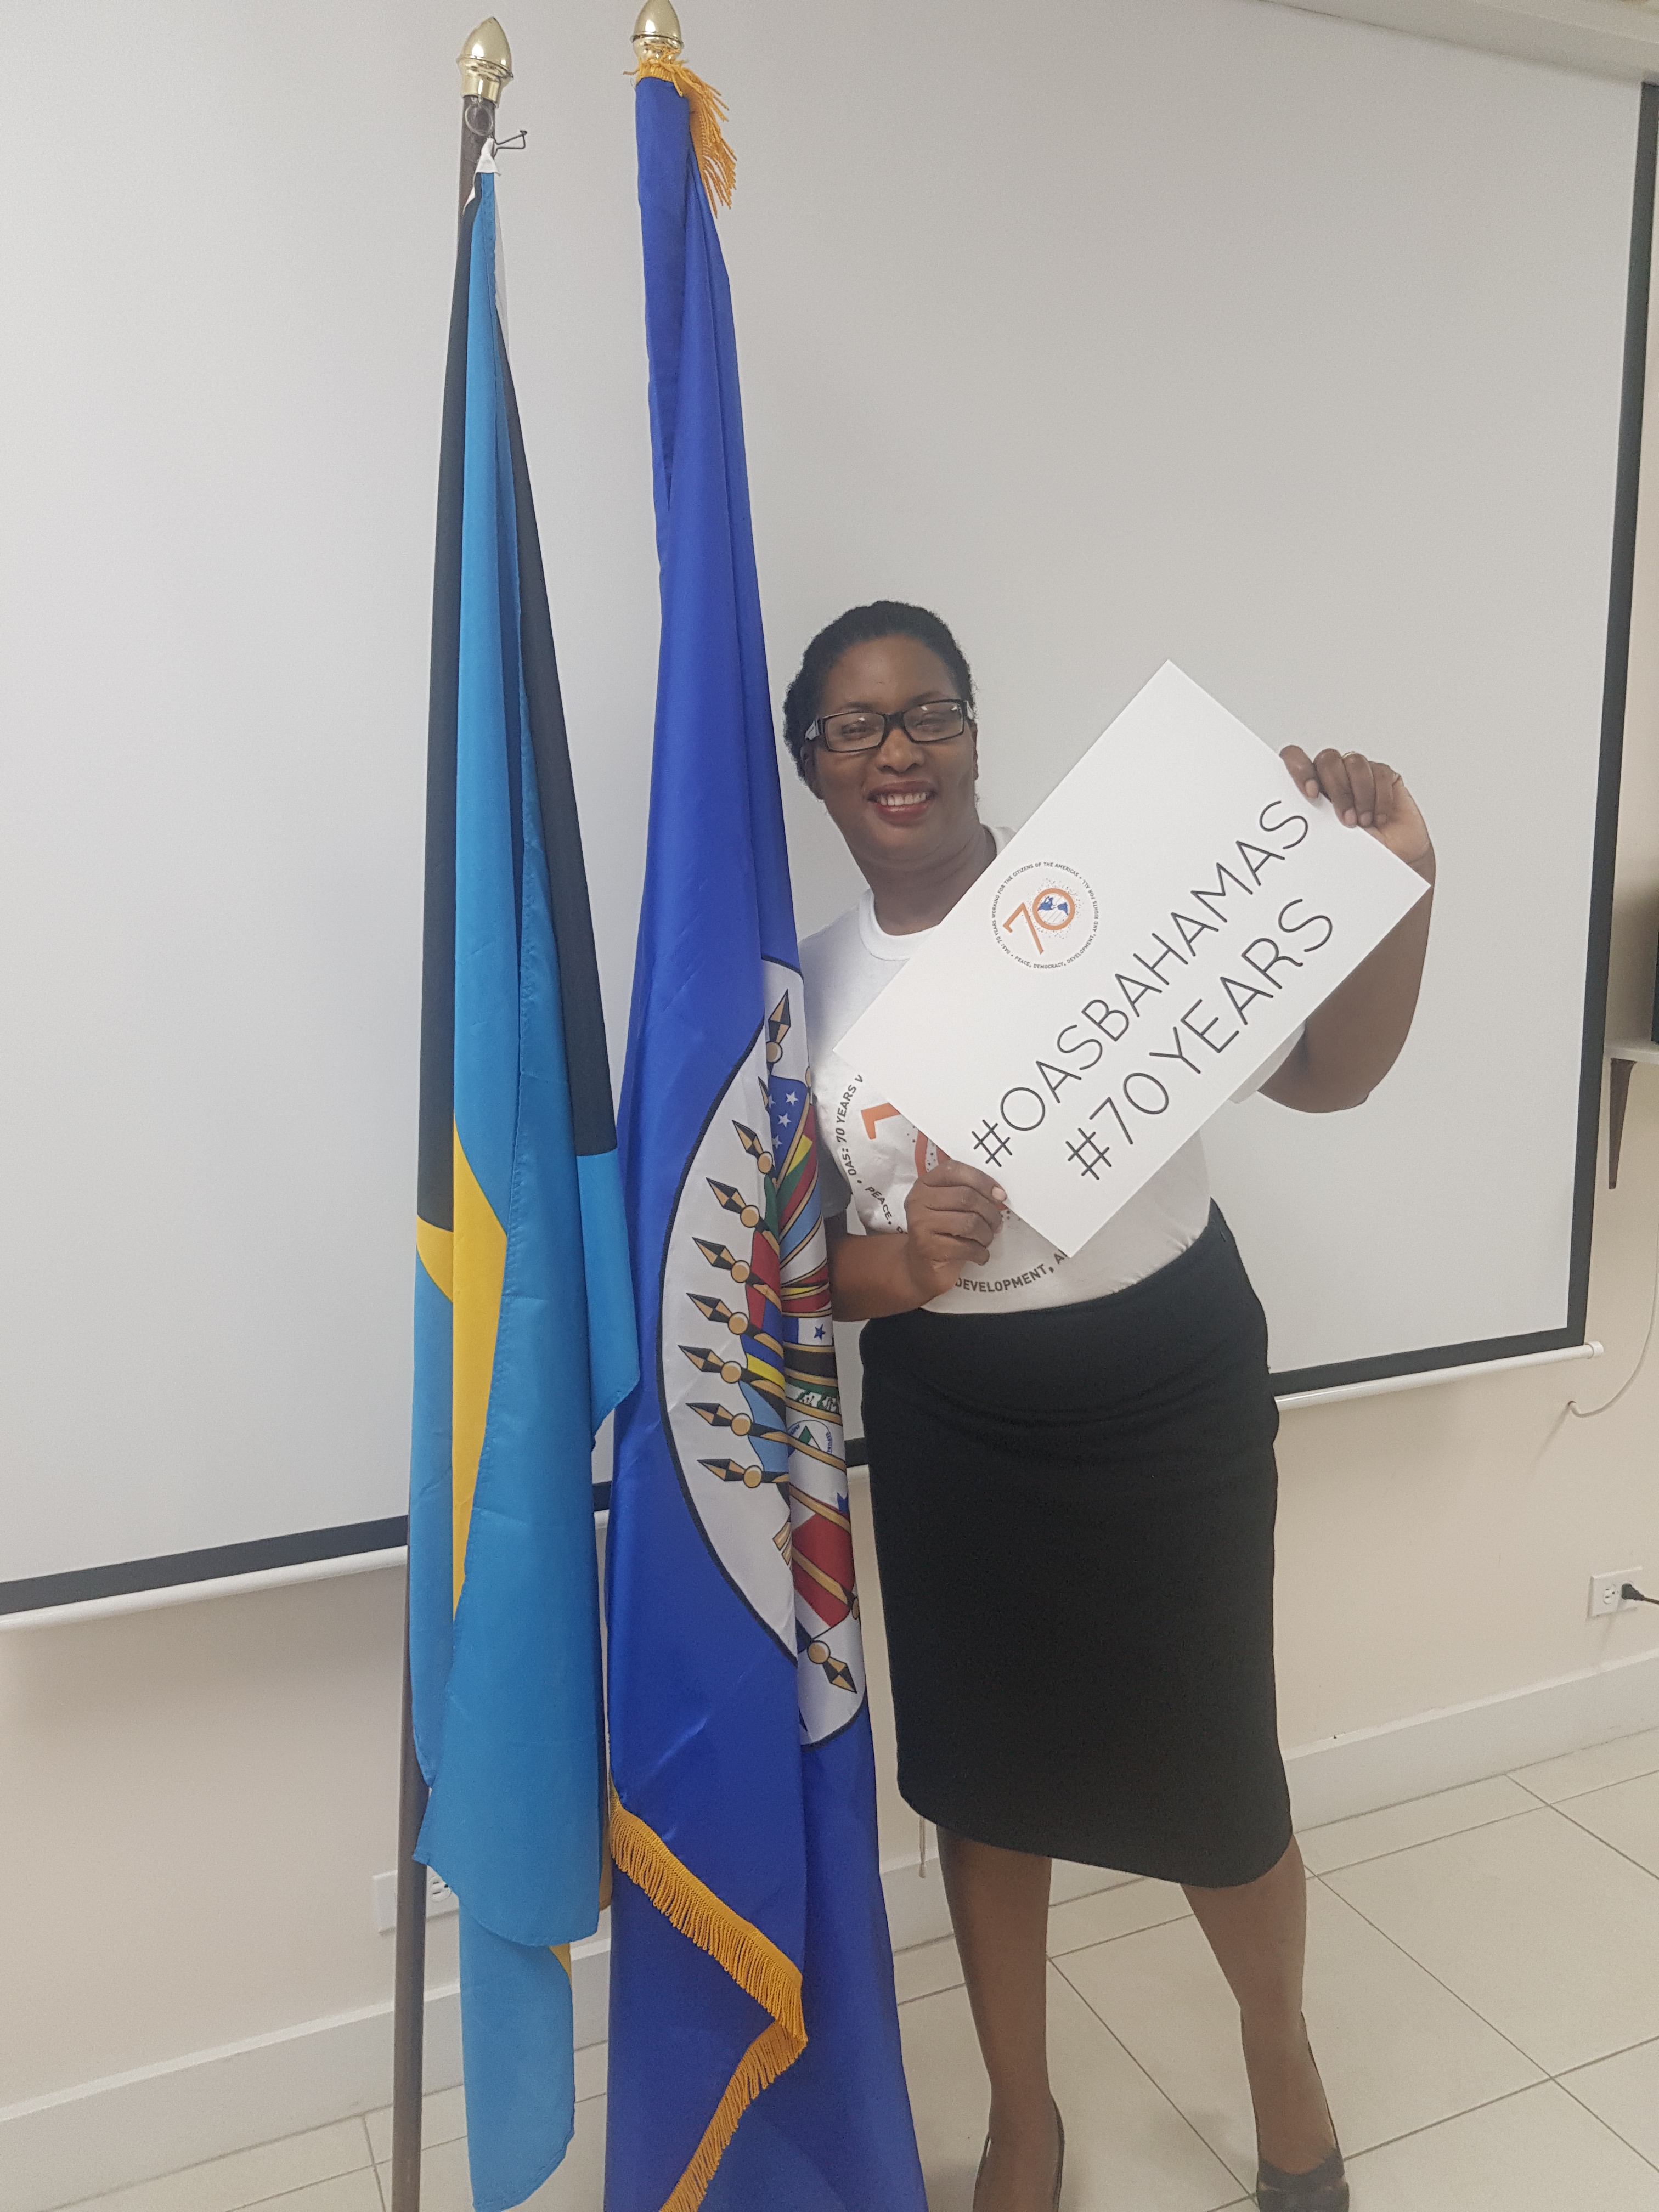 OAS turns 70 and the staff at The National Office in The Bahamas celebrated with a few fun selfies.(October 29, 2018)